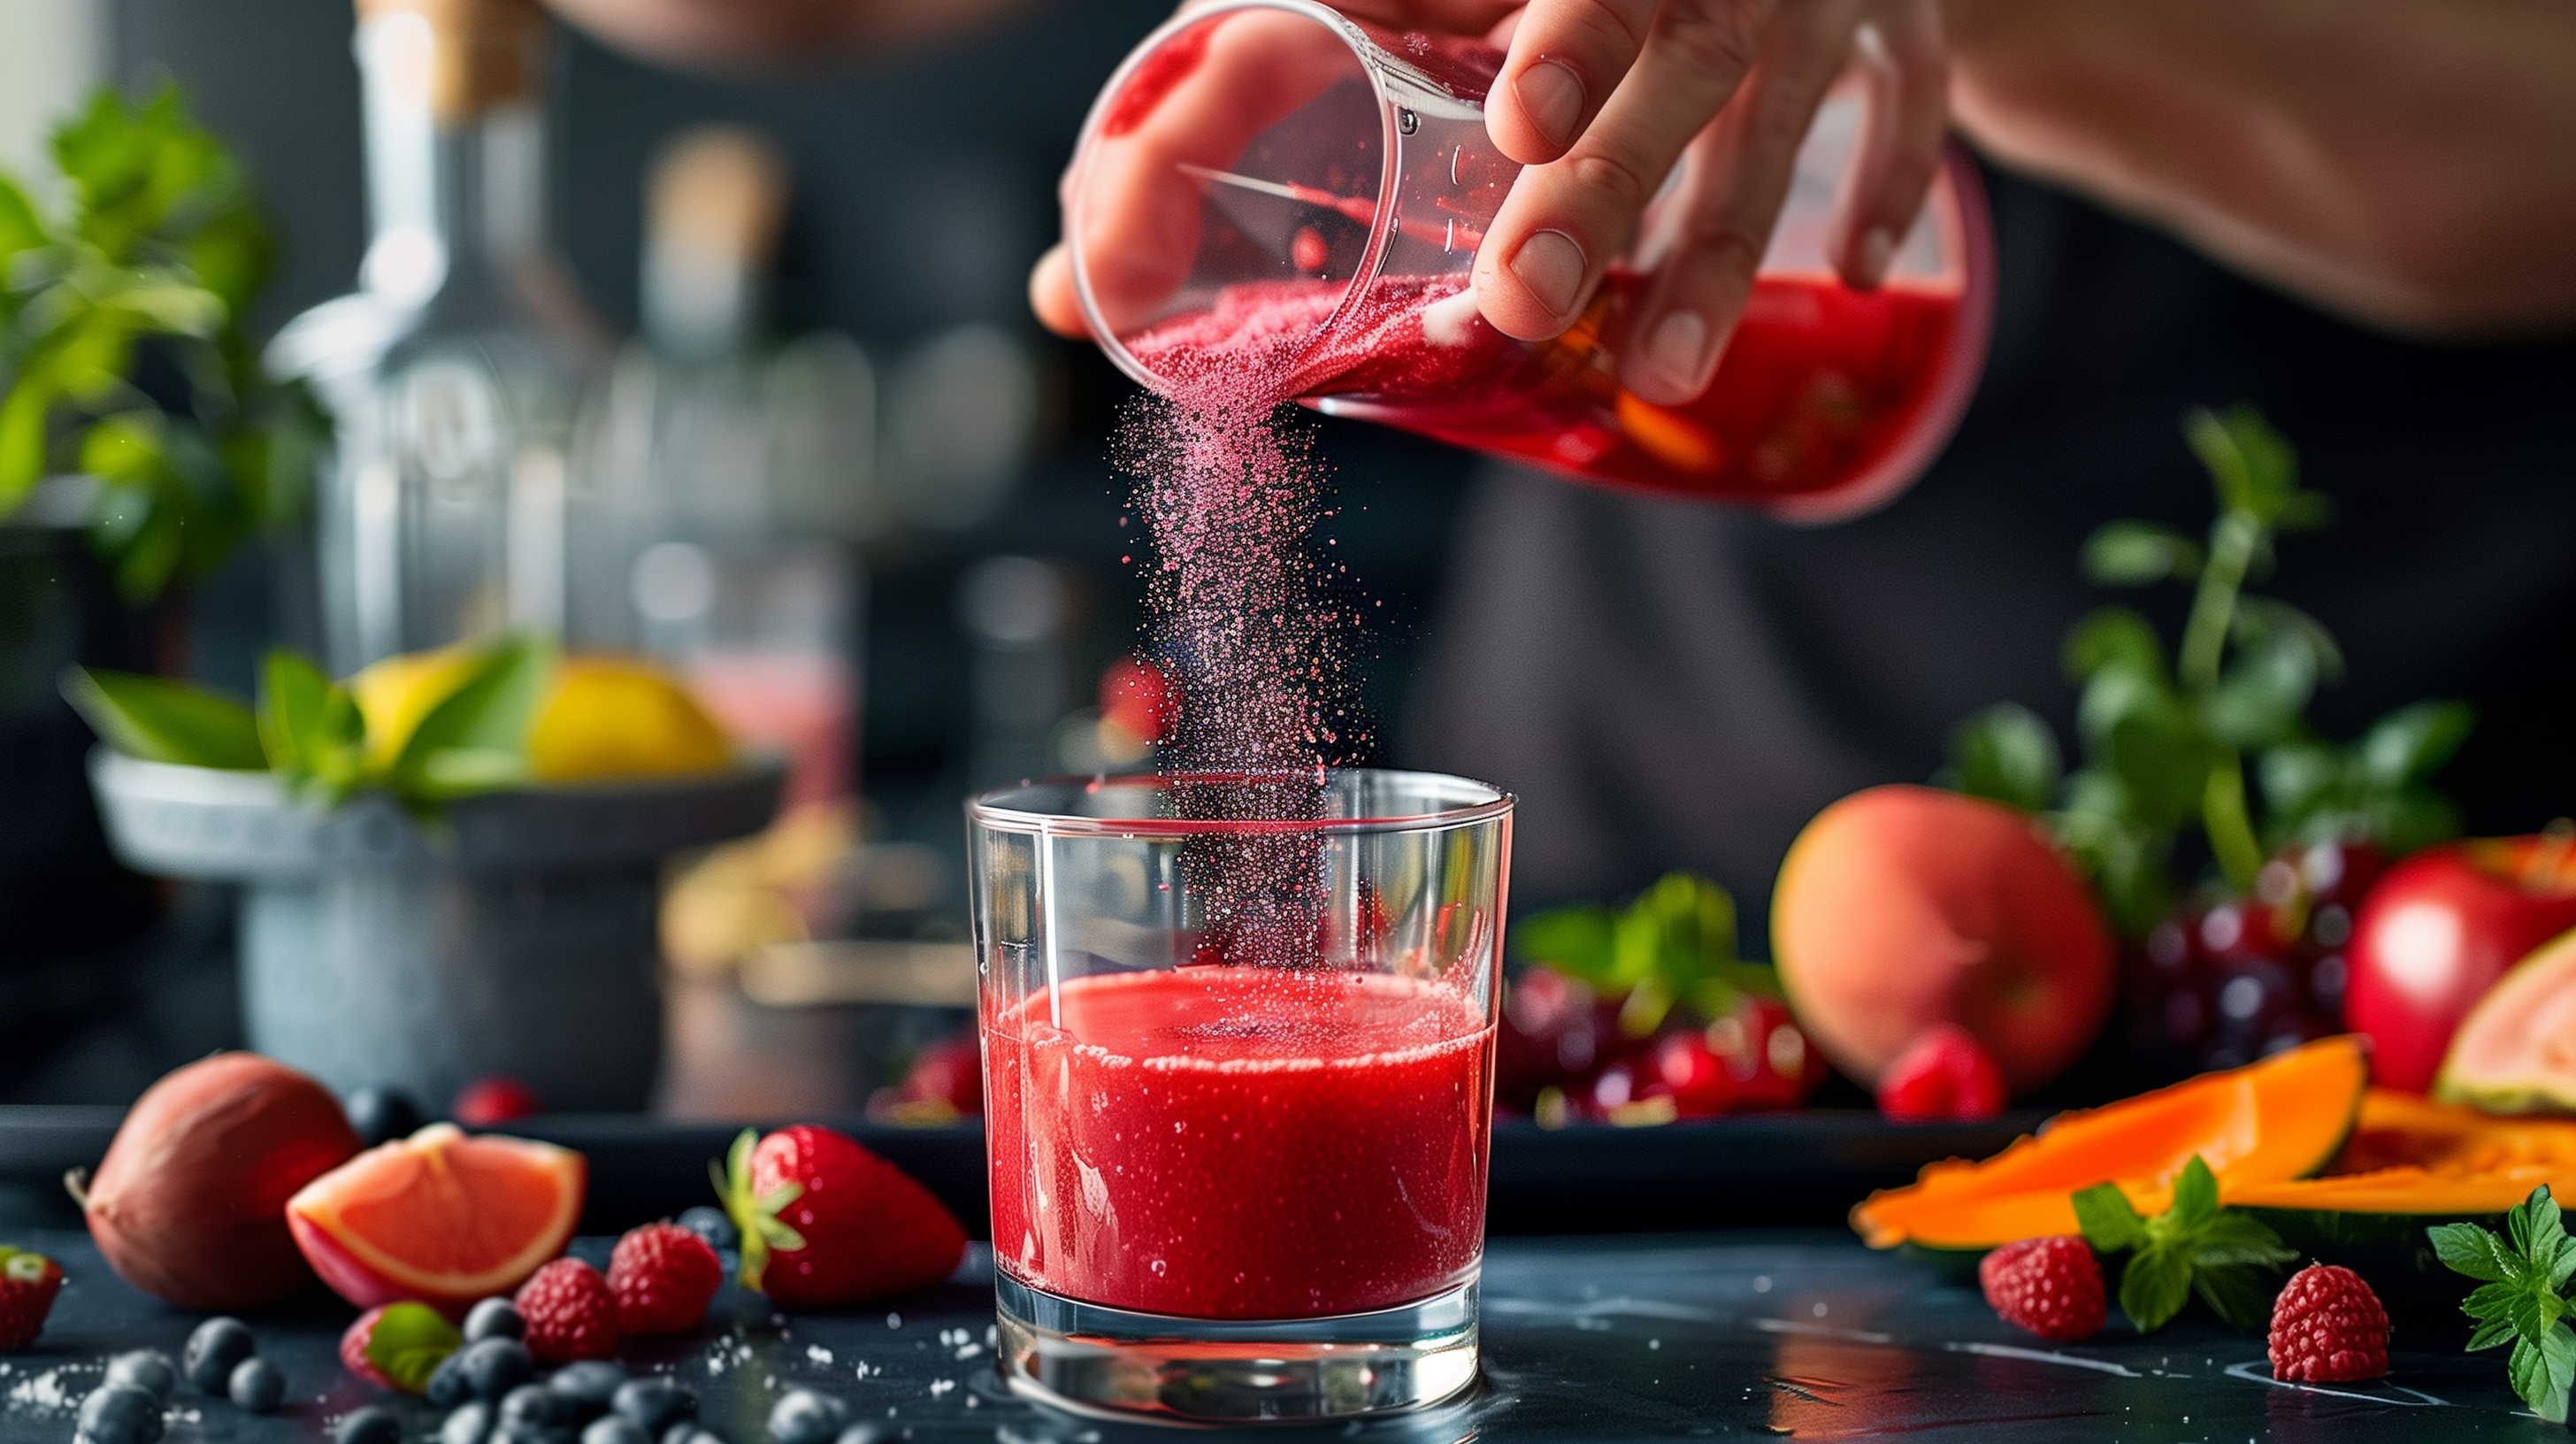 Essential Reds Powder, pouring it into a glass of water, with fruits and vegetables